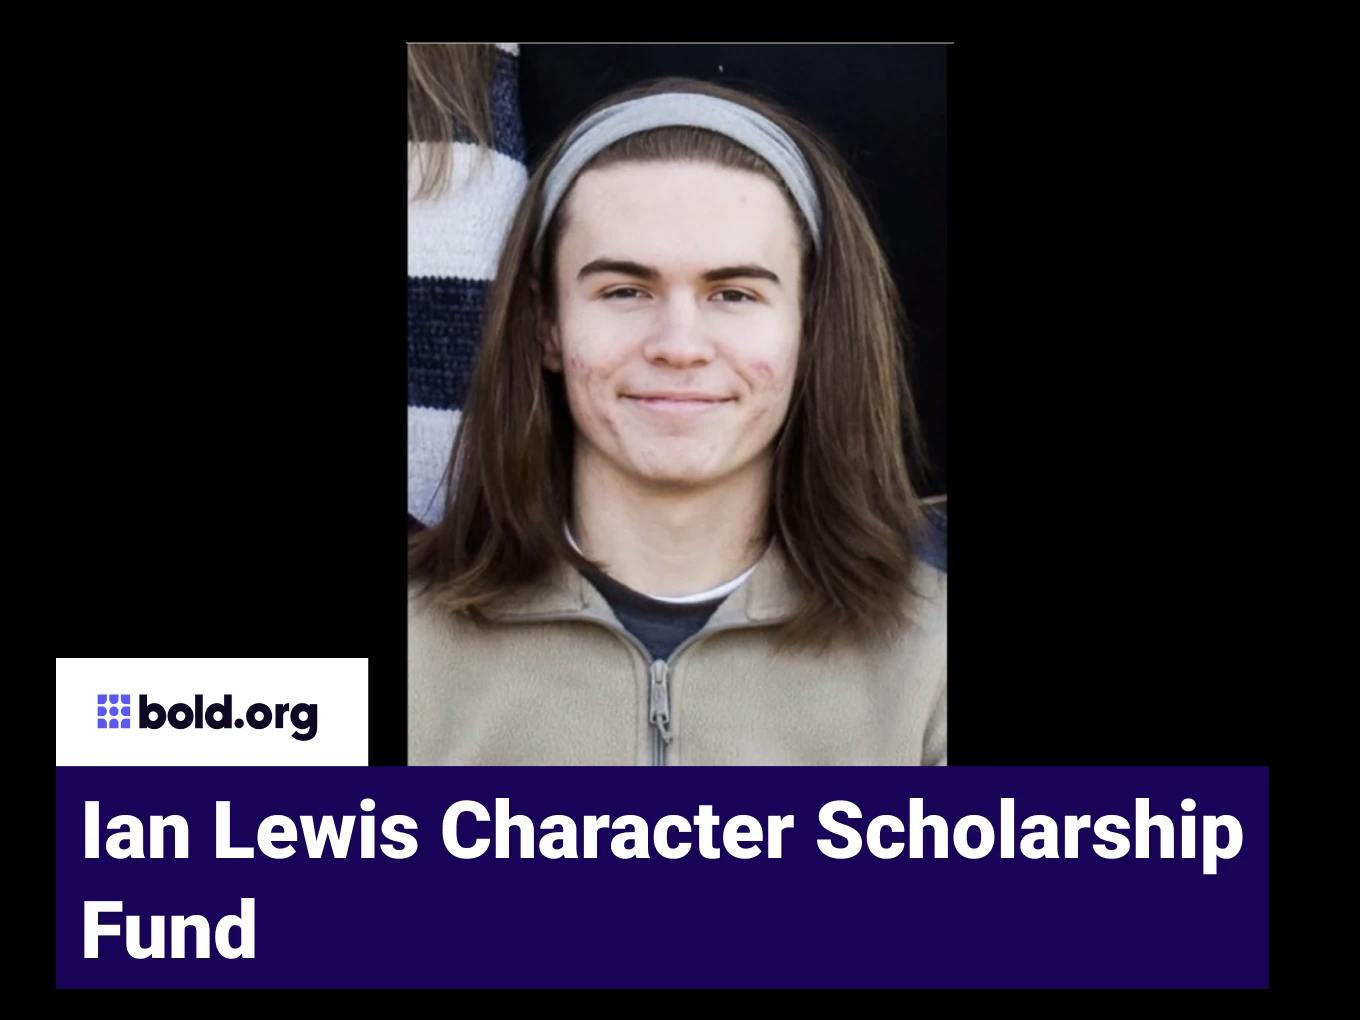 Ian Lewis Character Scholarship Fund